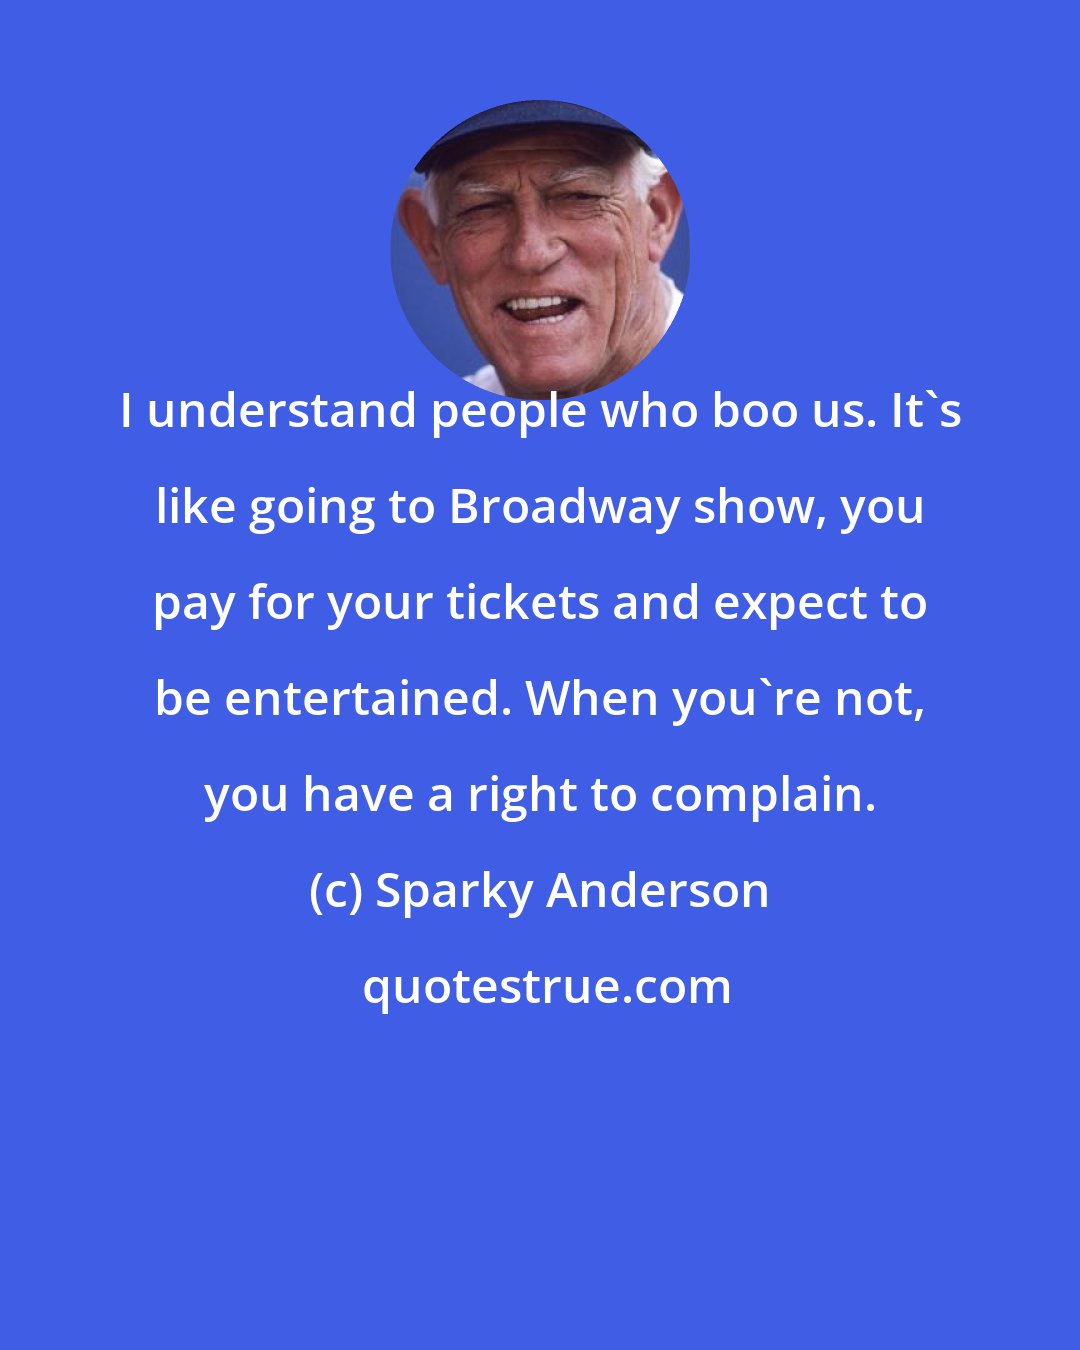 Sparky Anderson: I understand people who boo us. It's like going to Broadway show, you pay for your tickets and expect to be entertained. When you're not, you have a right to complain.